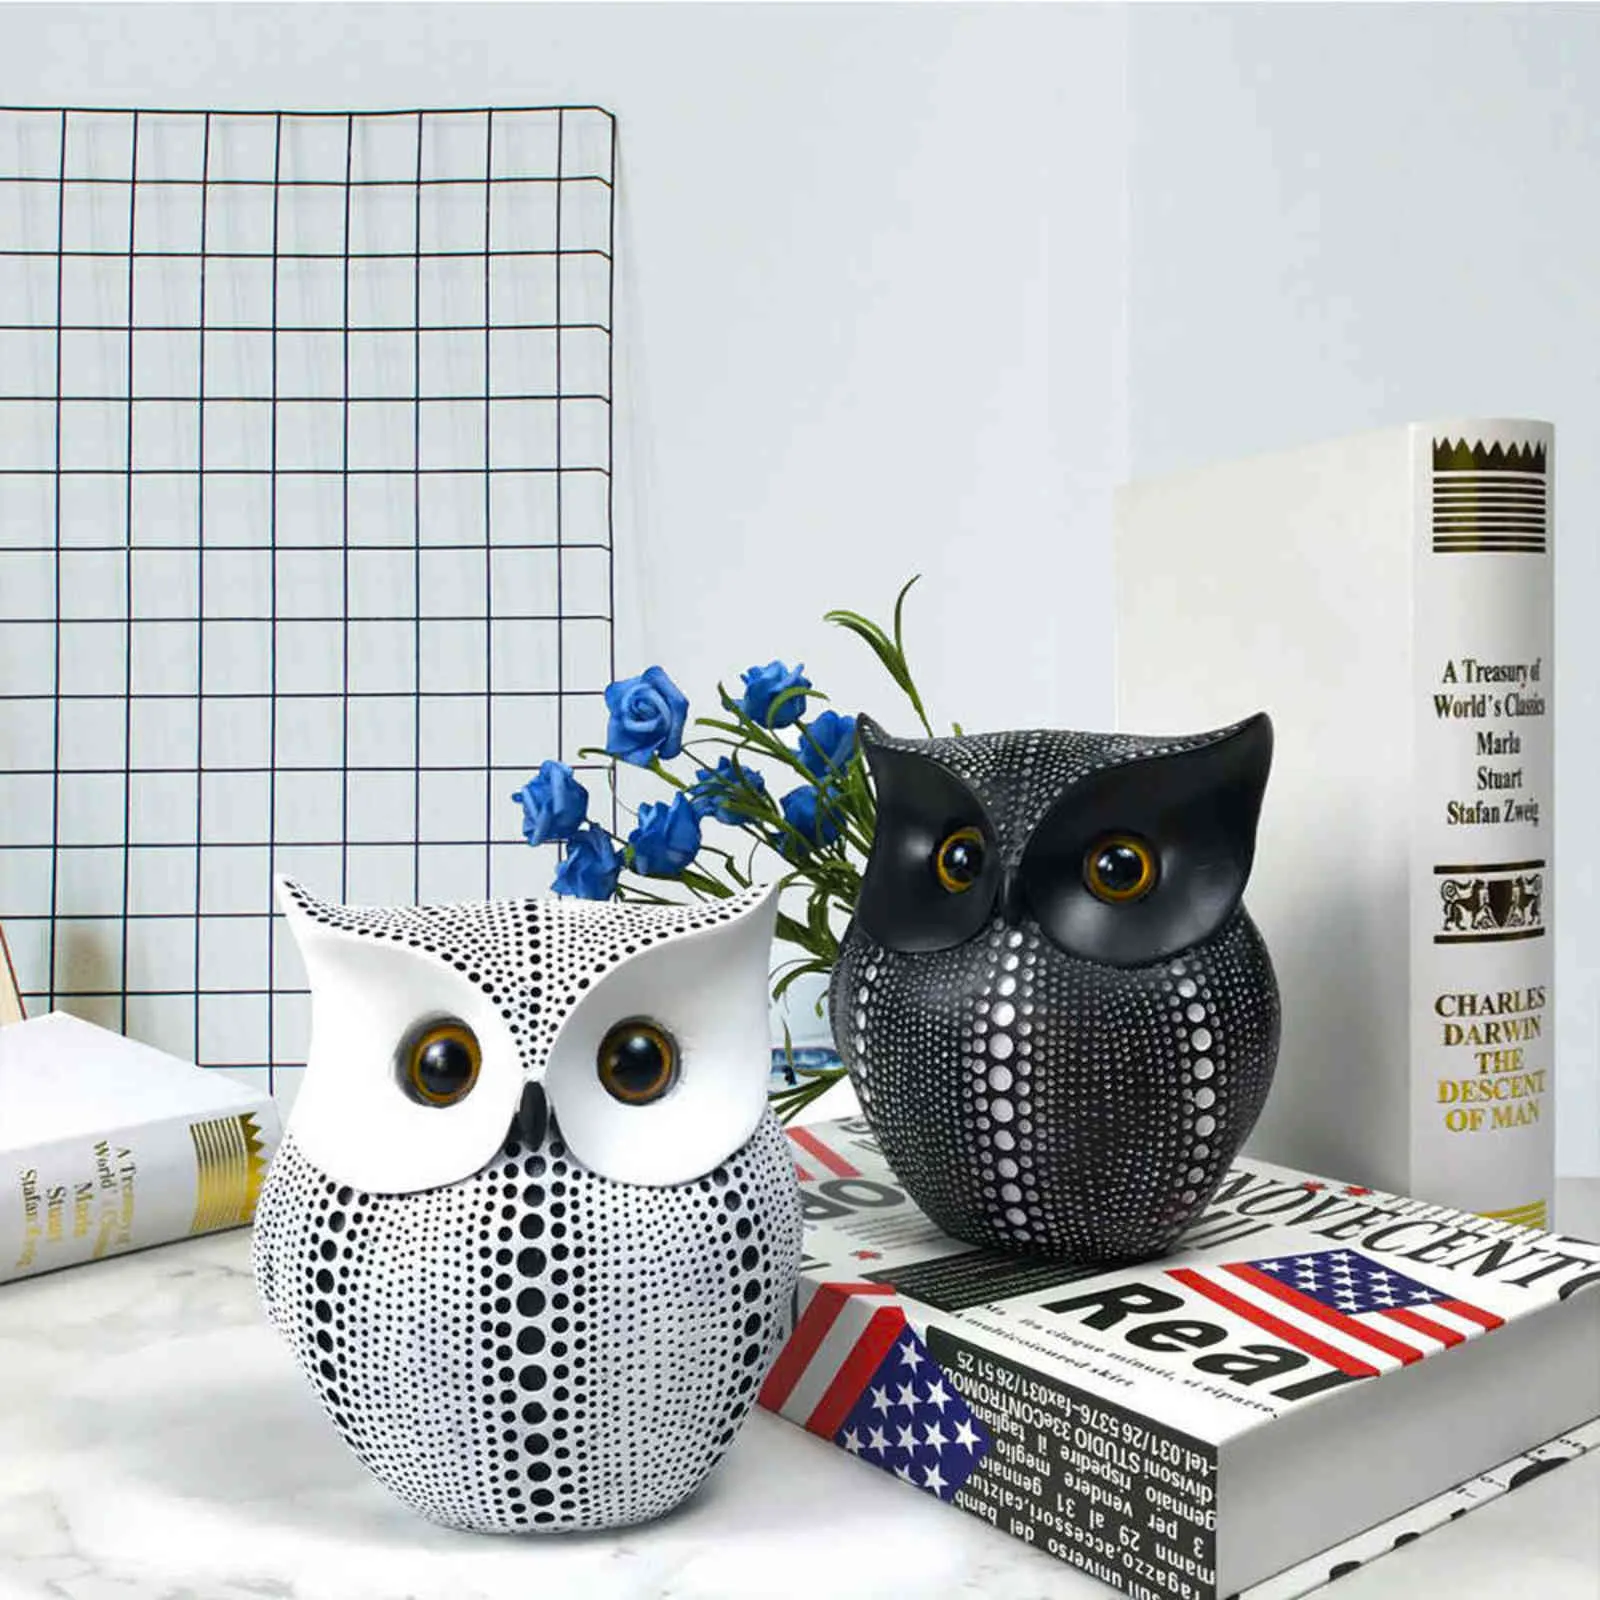 Small Crafted Owl Statue Bundle with Black and White for Home Decor Accents Living Room Bedroom Office Decoration 2111011879515